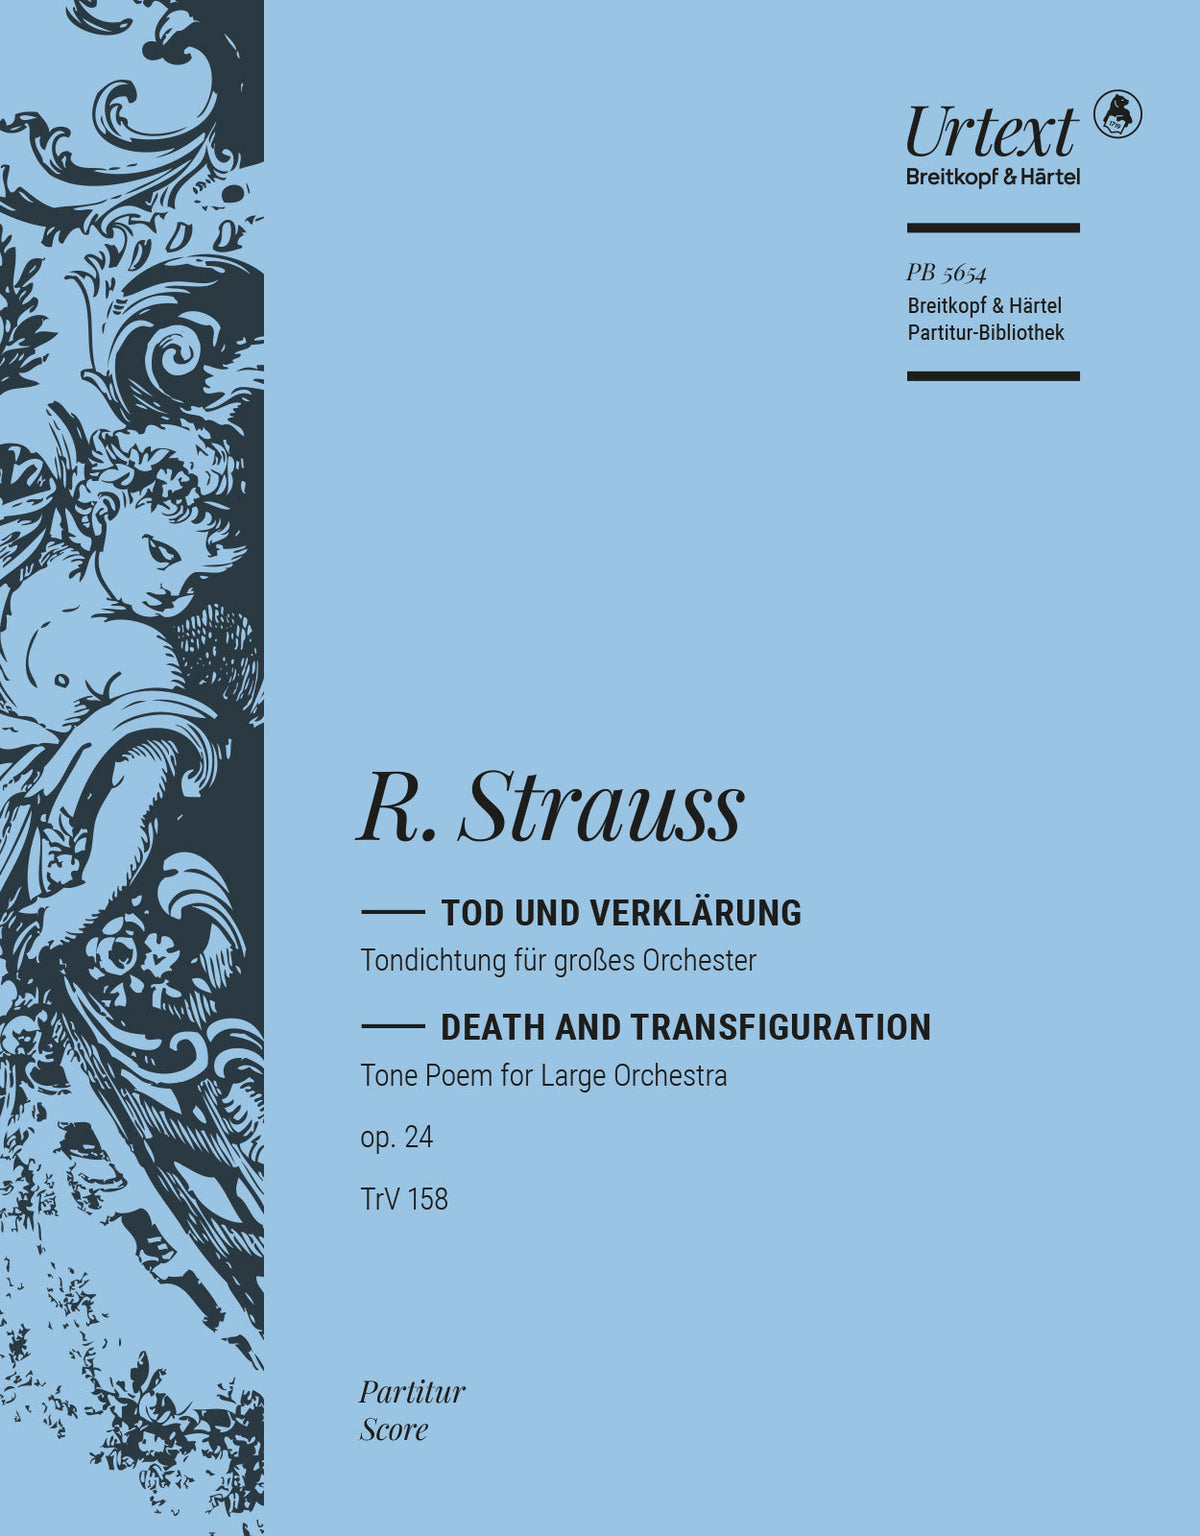 Strauss Death and Transfiguration Op. 24 TrV 158